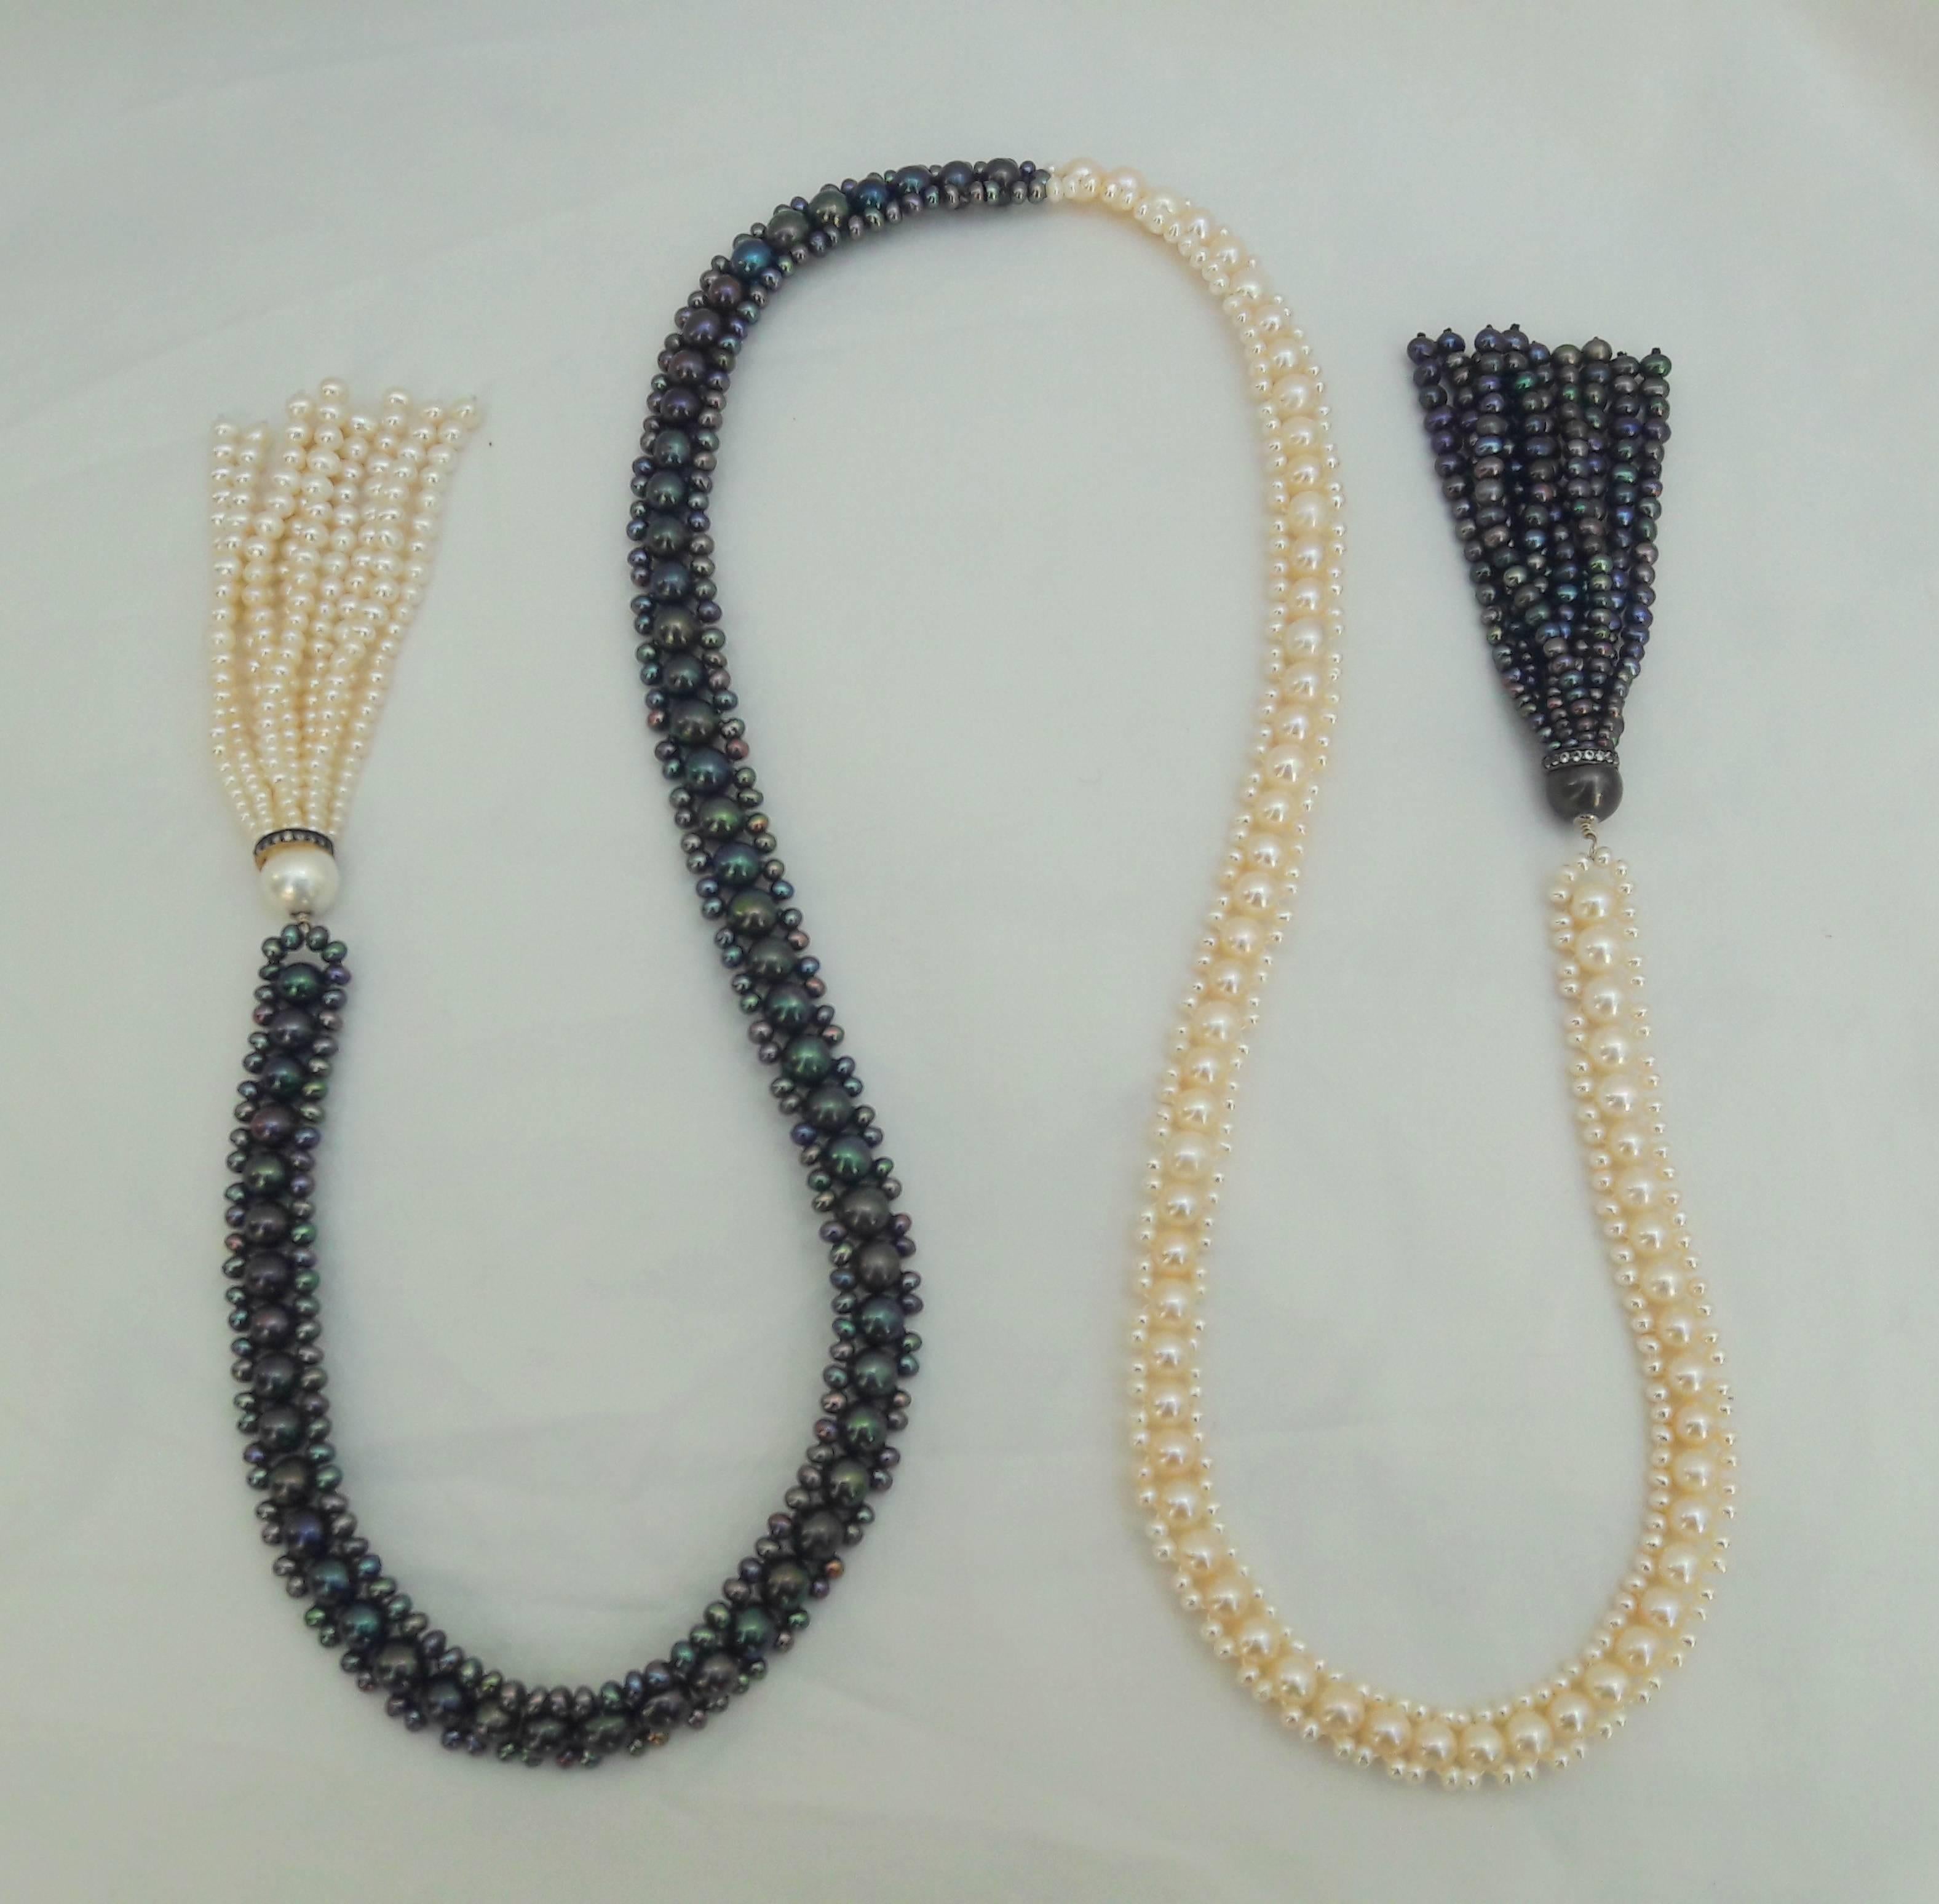 Marina J. Long Woven Black and White Pearl Sautoir Necklace in Art Deco Style  3